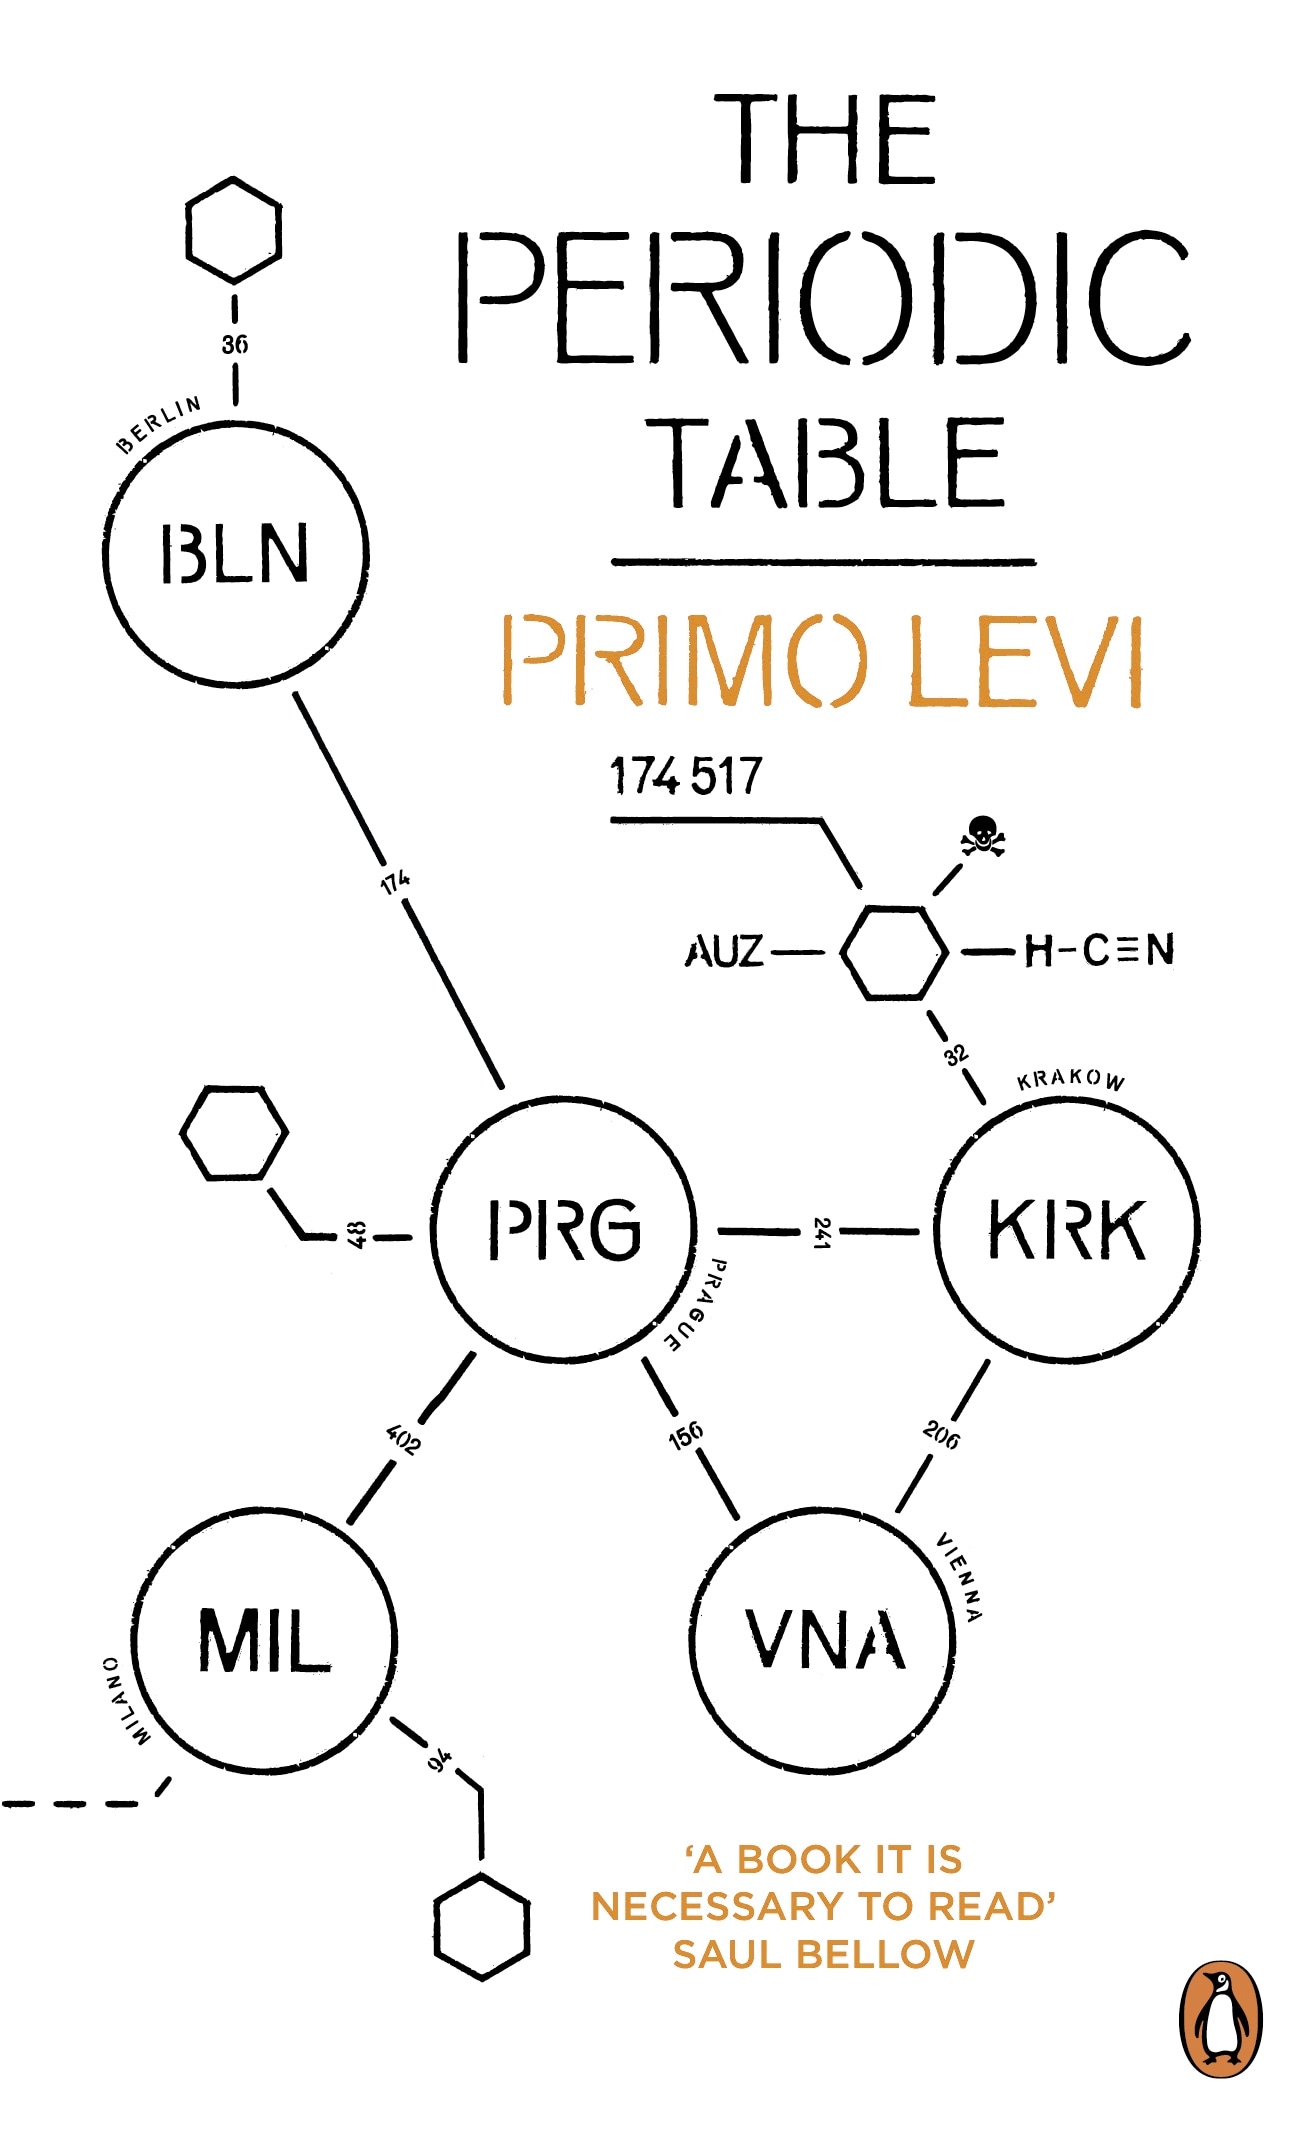 Book “The Periodic Table” by Primo Levi — April 5, 2012